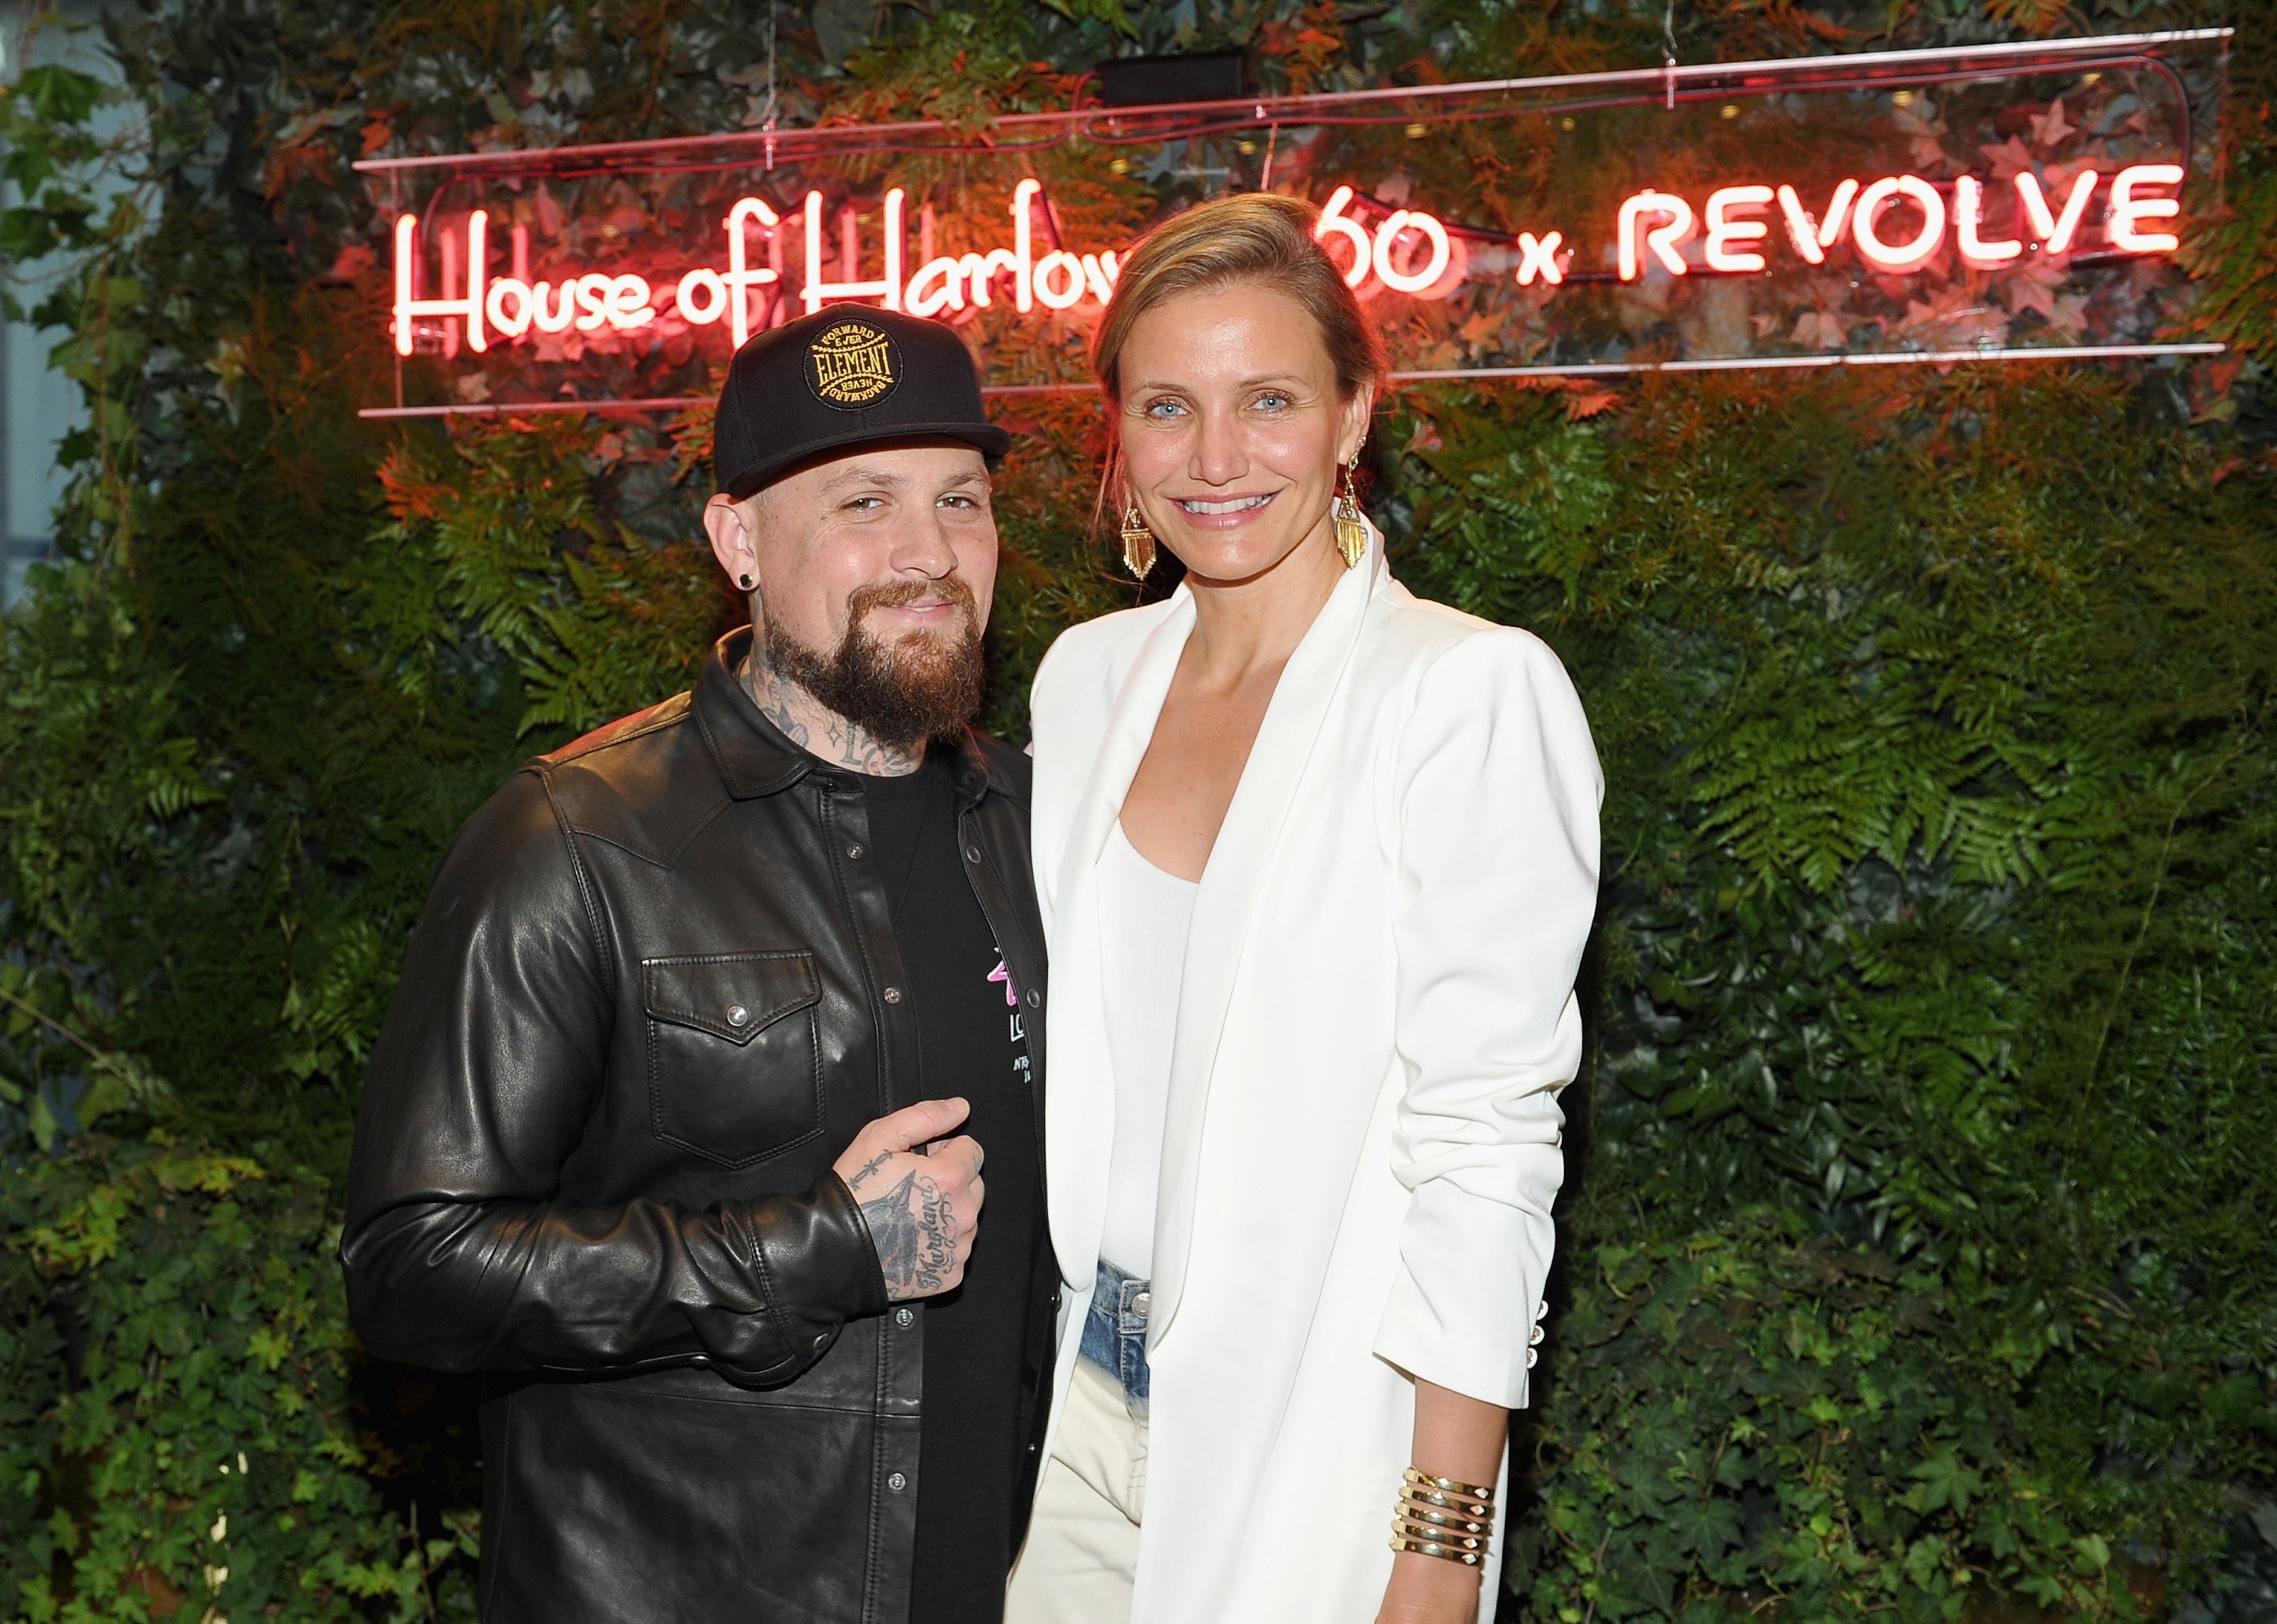 Benji Madden and actress Cameron Diaz attend House of Harlow 1960 x REVOLVE on June 2, 2016. | Source: Getty Images